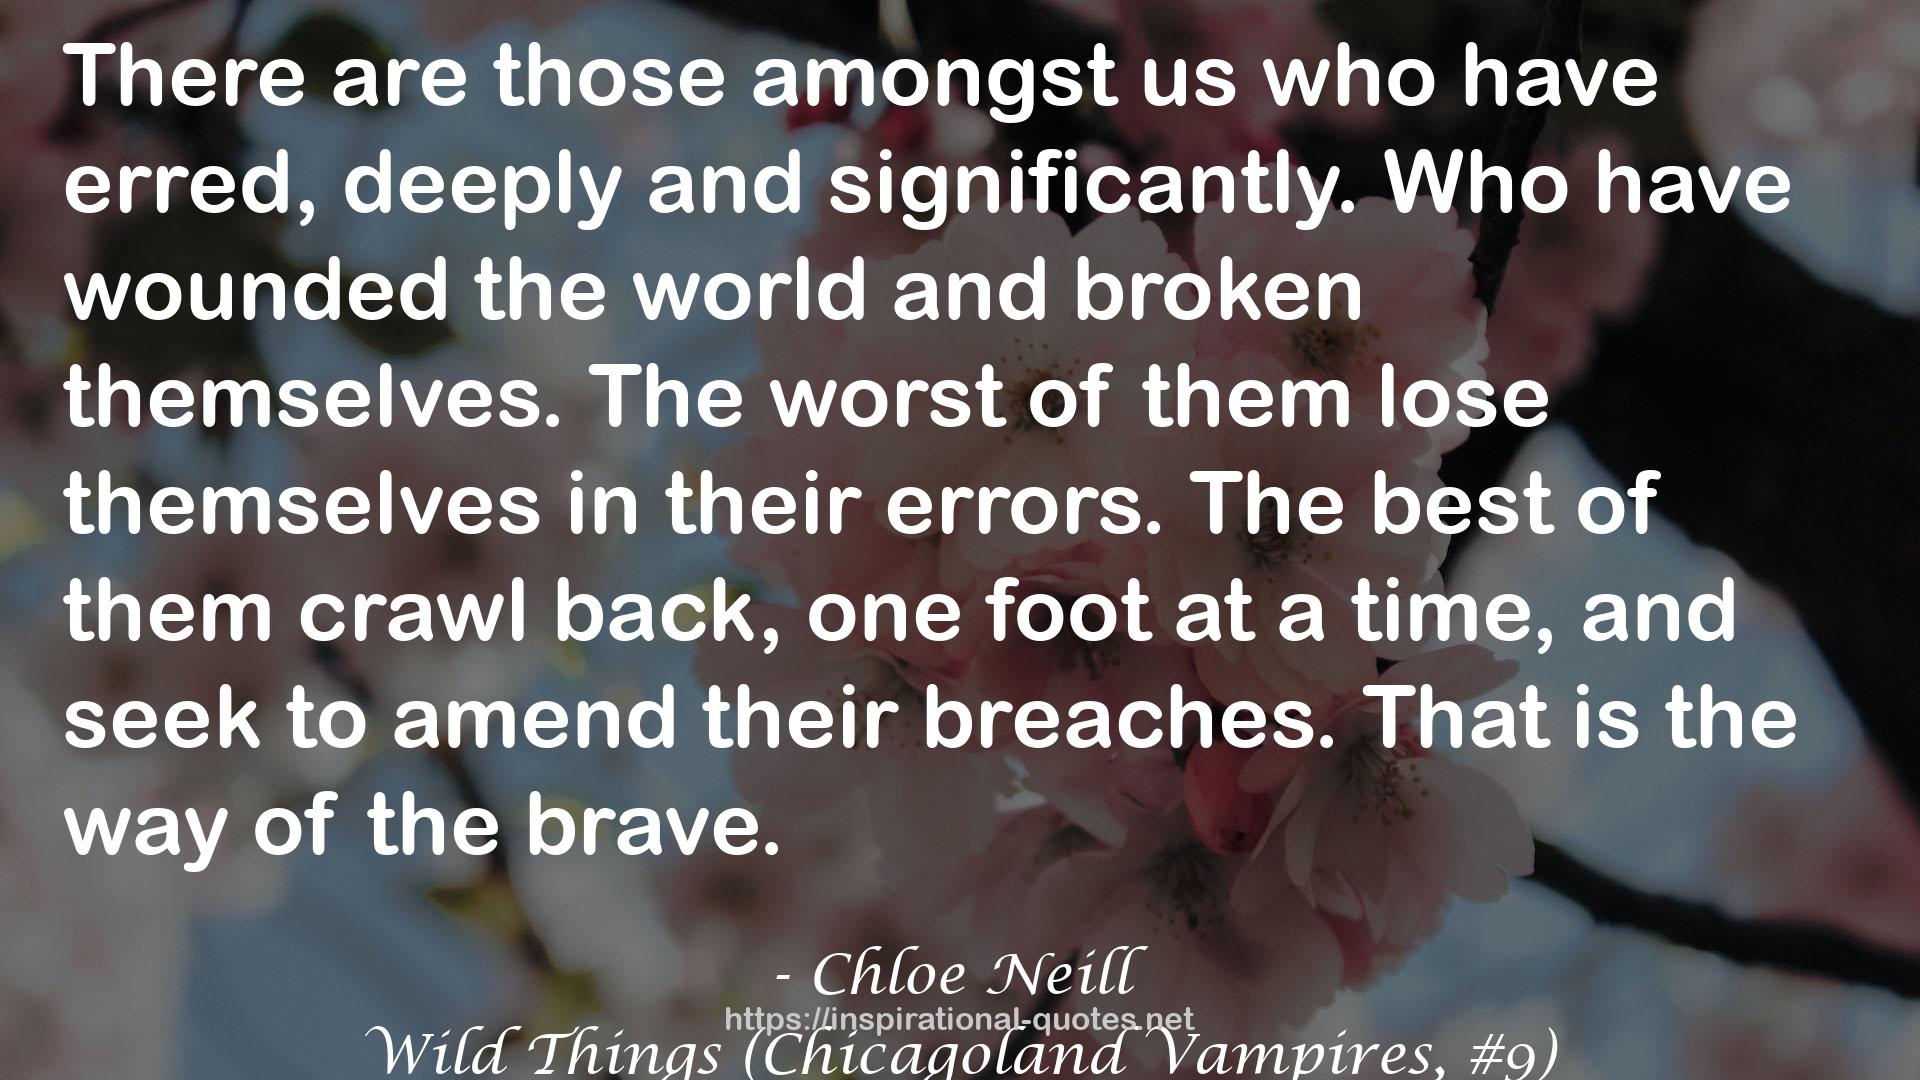 Wild Things (Chicagoland Vampires, #9) QUOTES